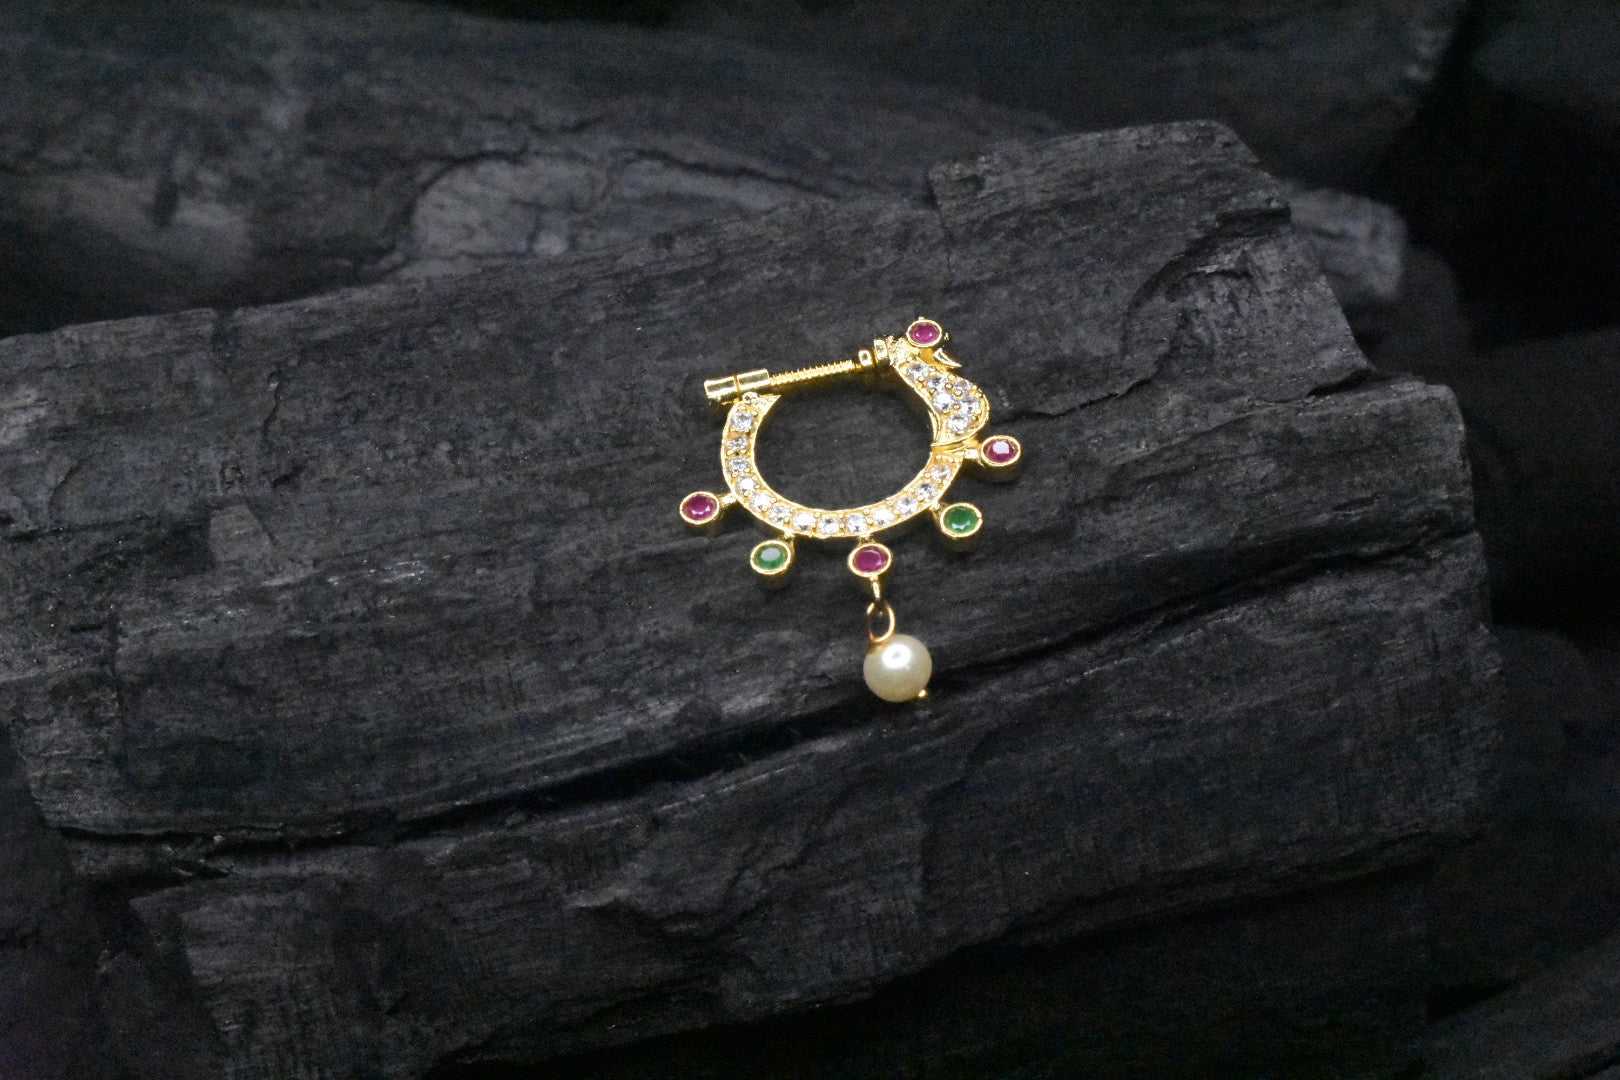 Buy Mrigangi Gold Plated Marathi Clip on Nose Pin Peacock Design Without Piercing  Nose Ring Nath for Women and Girls | at Amazon.in